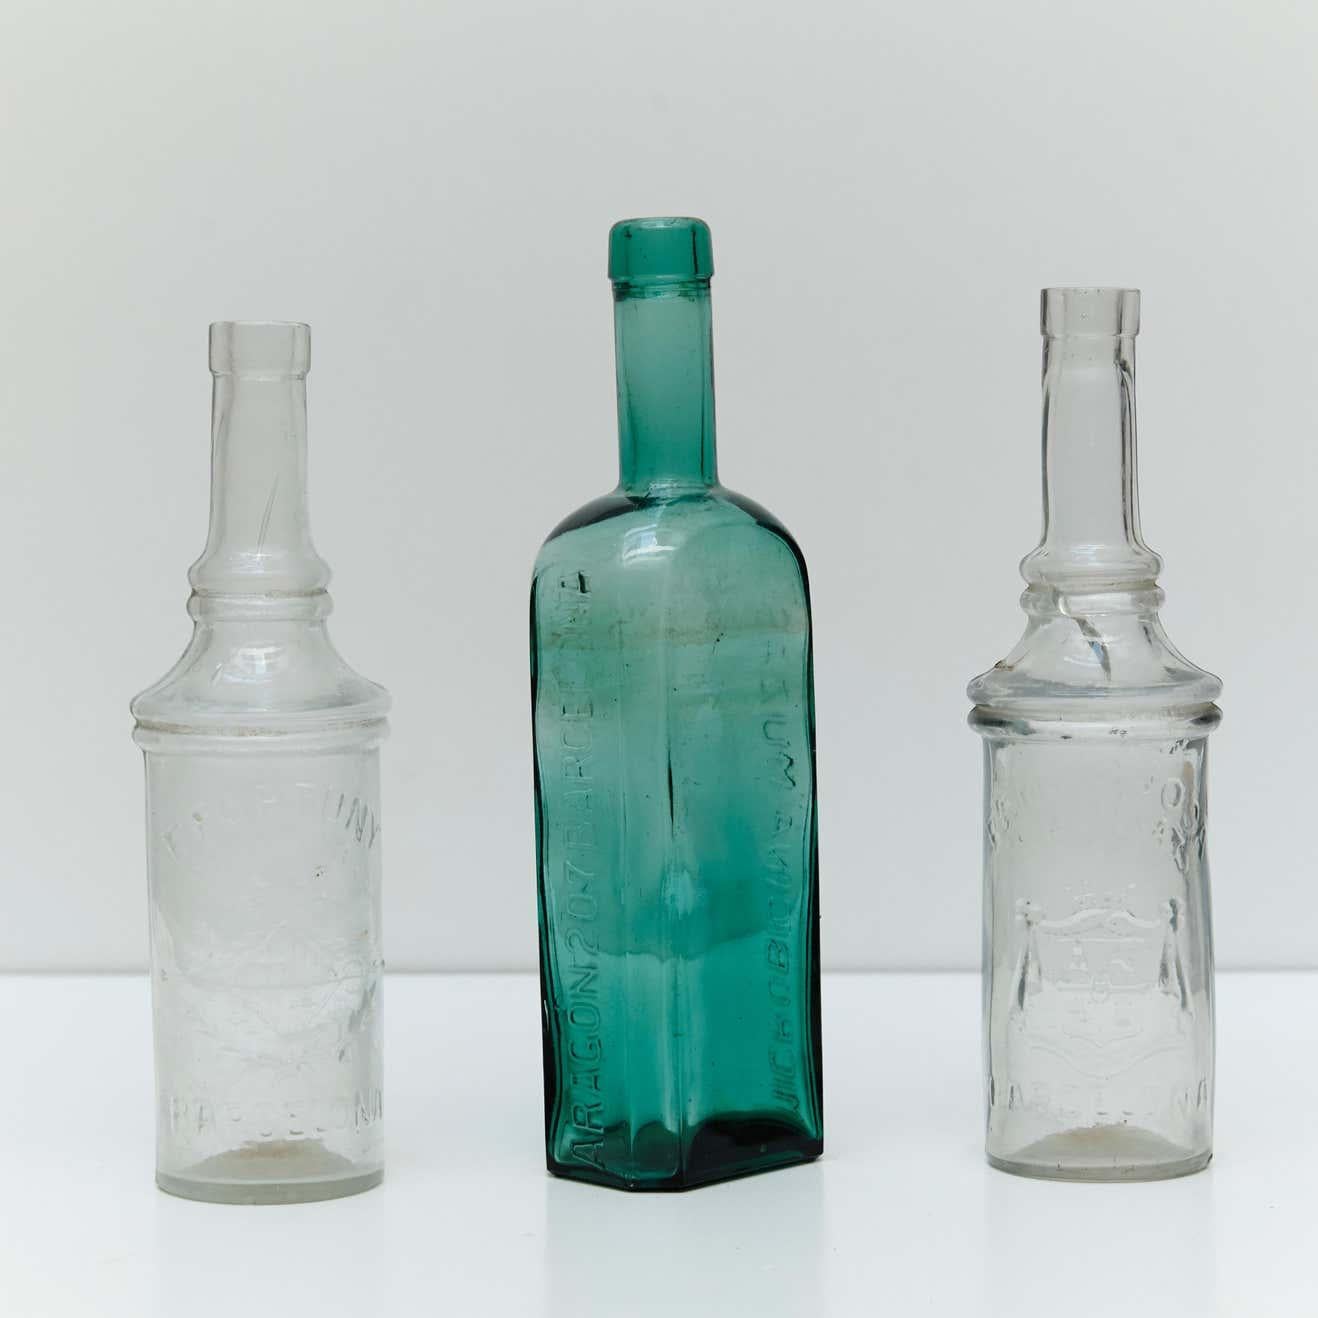 A set of 3 1920s Pharmacy set from Barcelona.
Glass.

In original condition with minor wear consistent of age and use, preserving a beautiful patina.